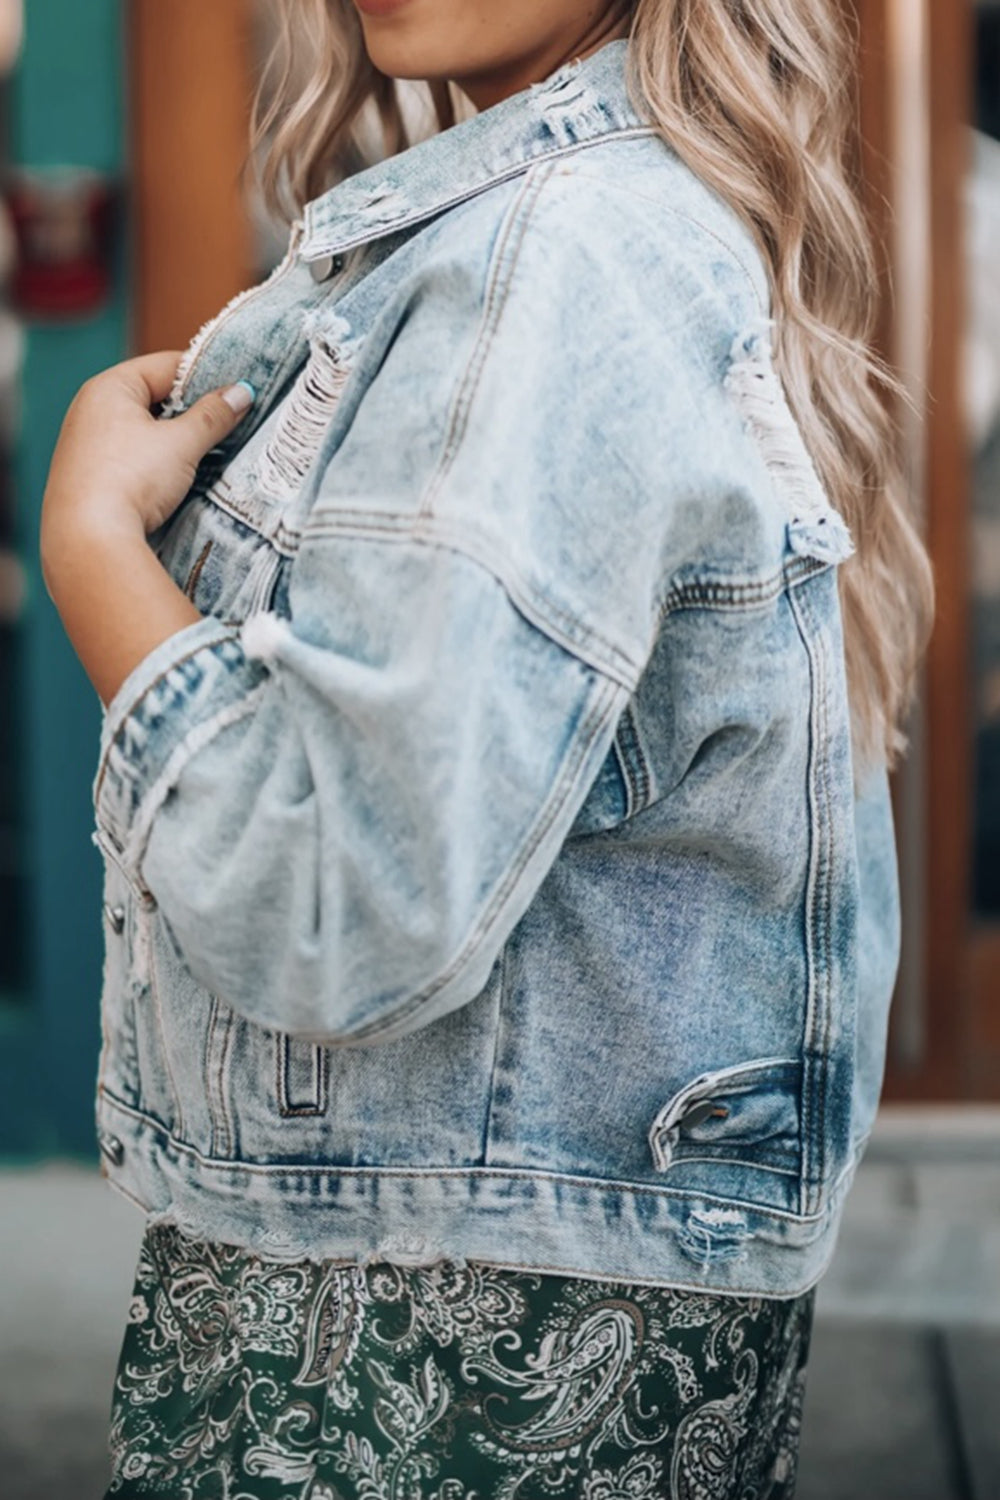 Distressed Drop Shoulder Denim Jacket Print on any thing USA/STOD clothes